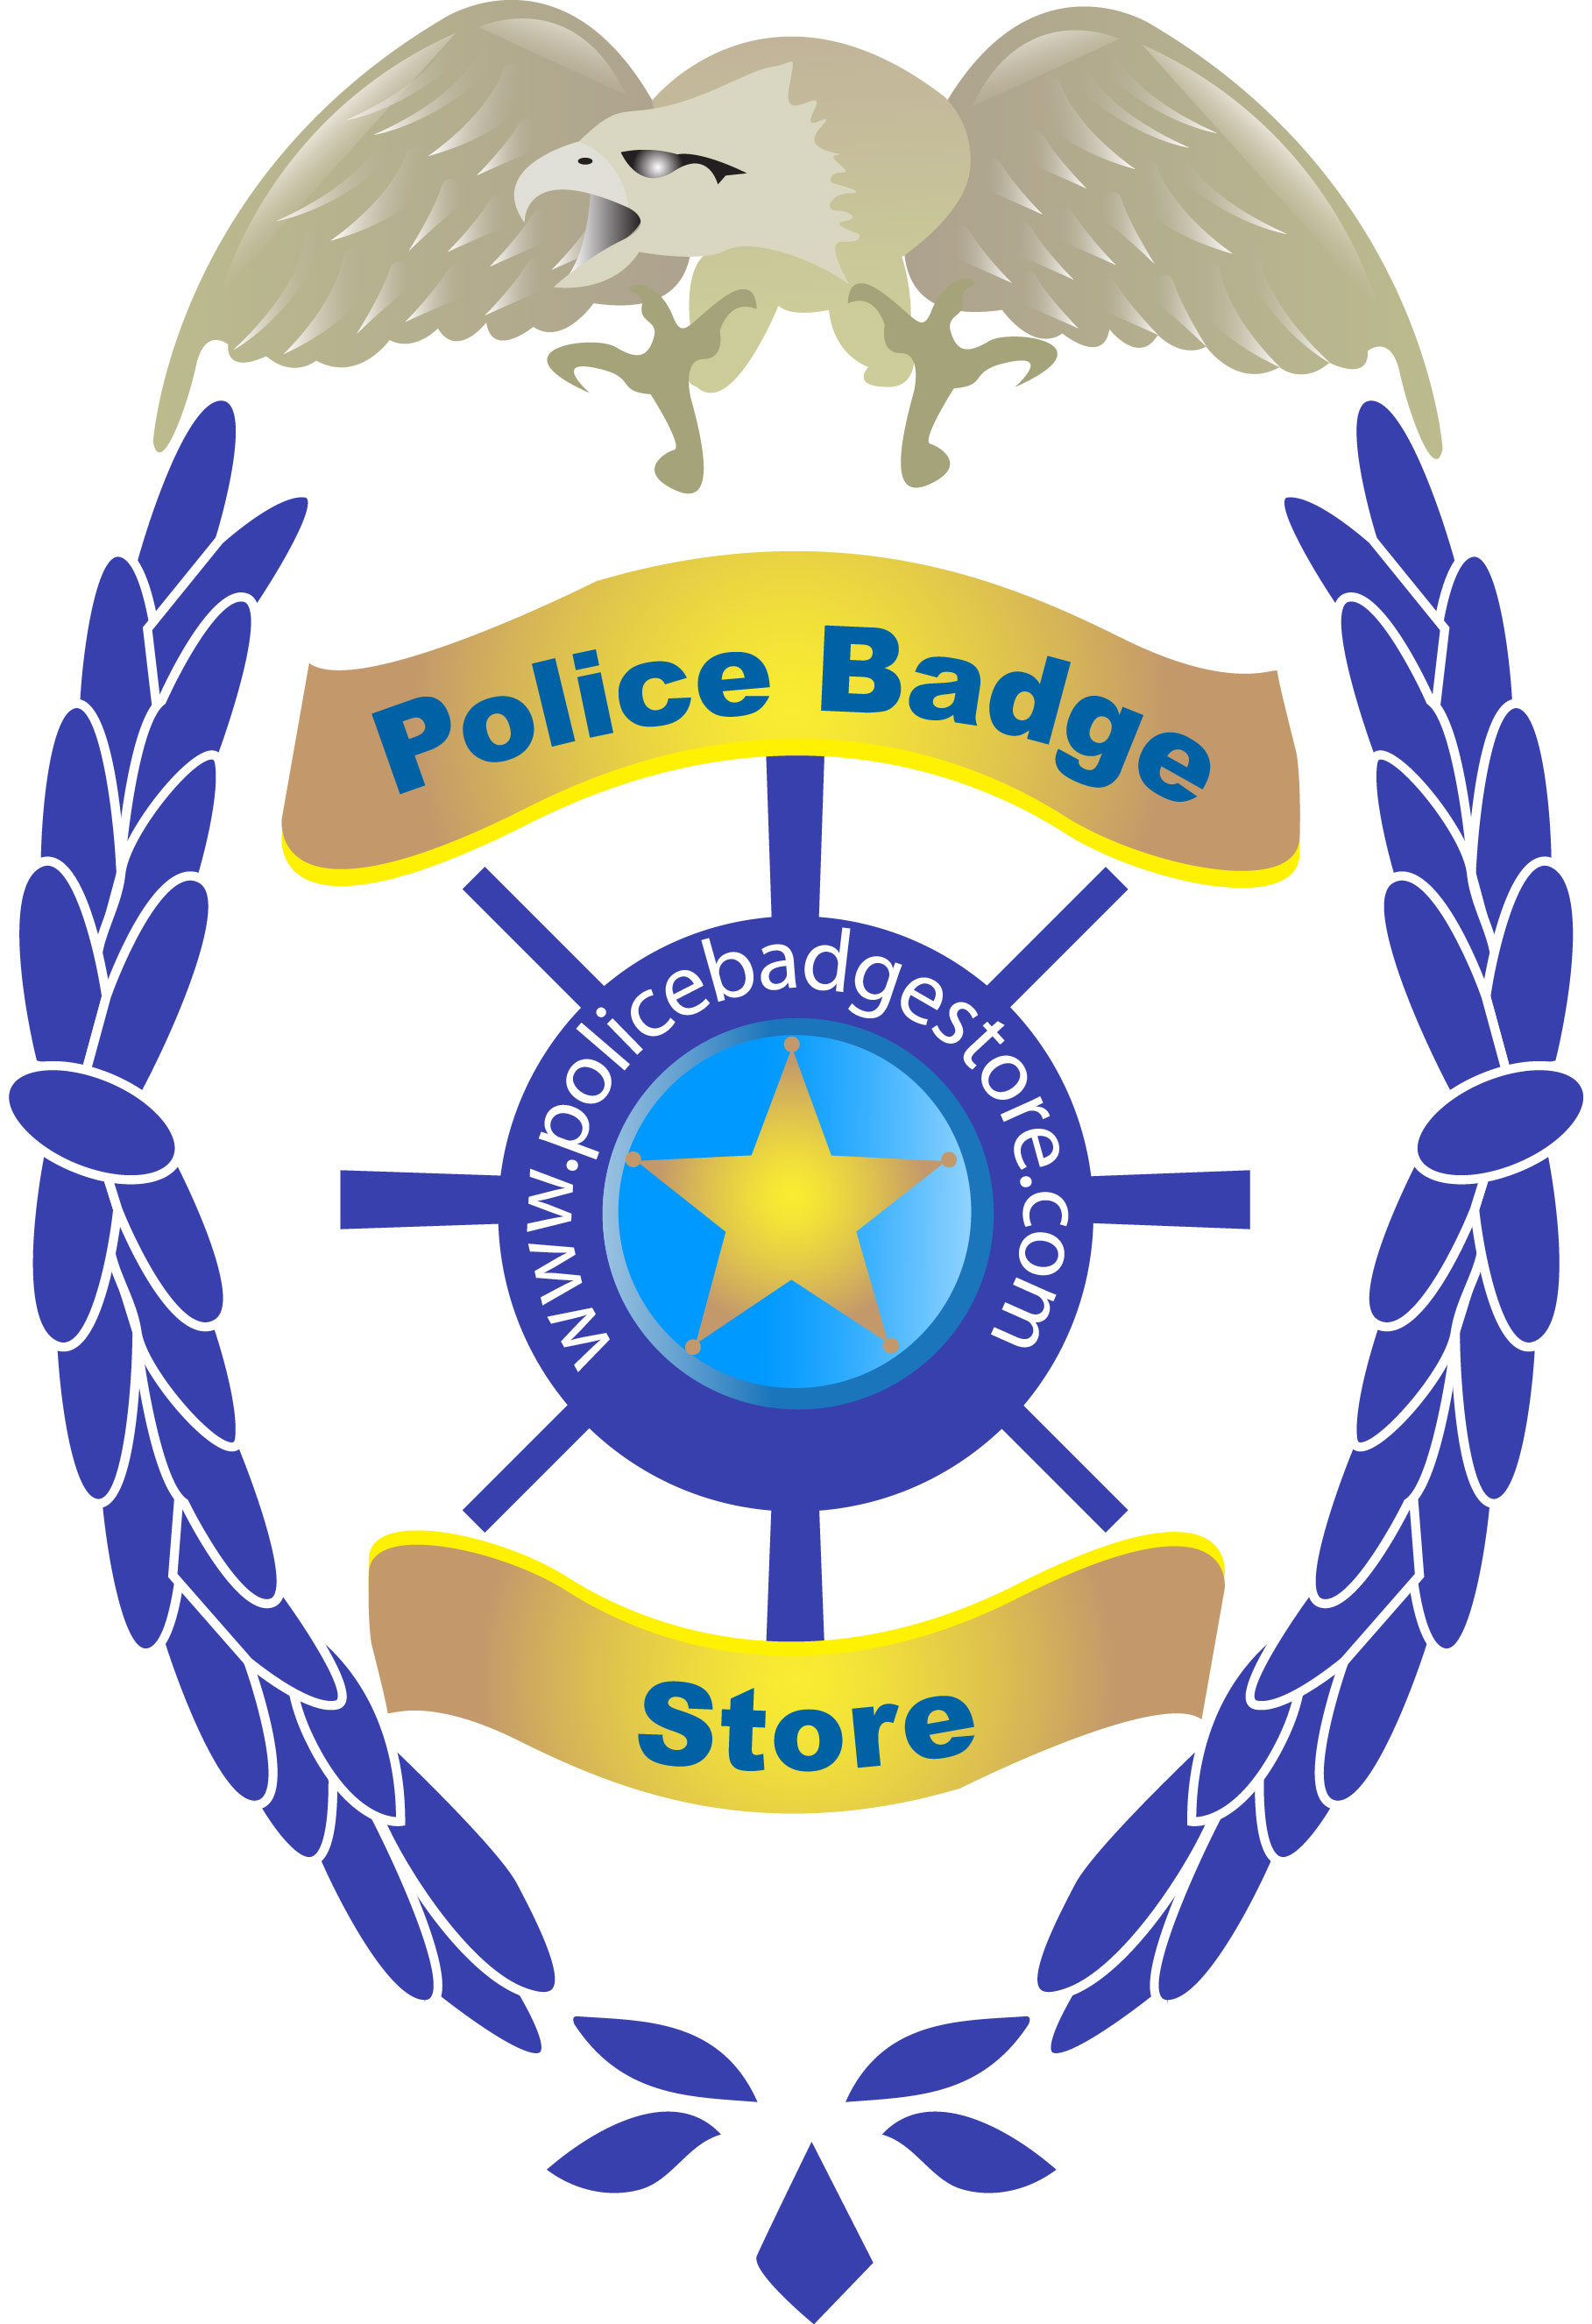 80 - Anu's 8-Pointed Star symbol on Police Badge